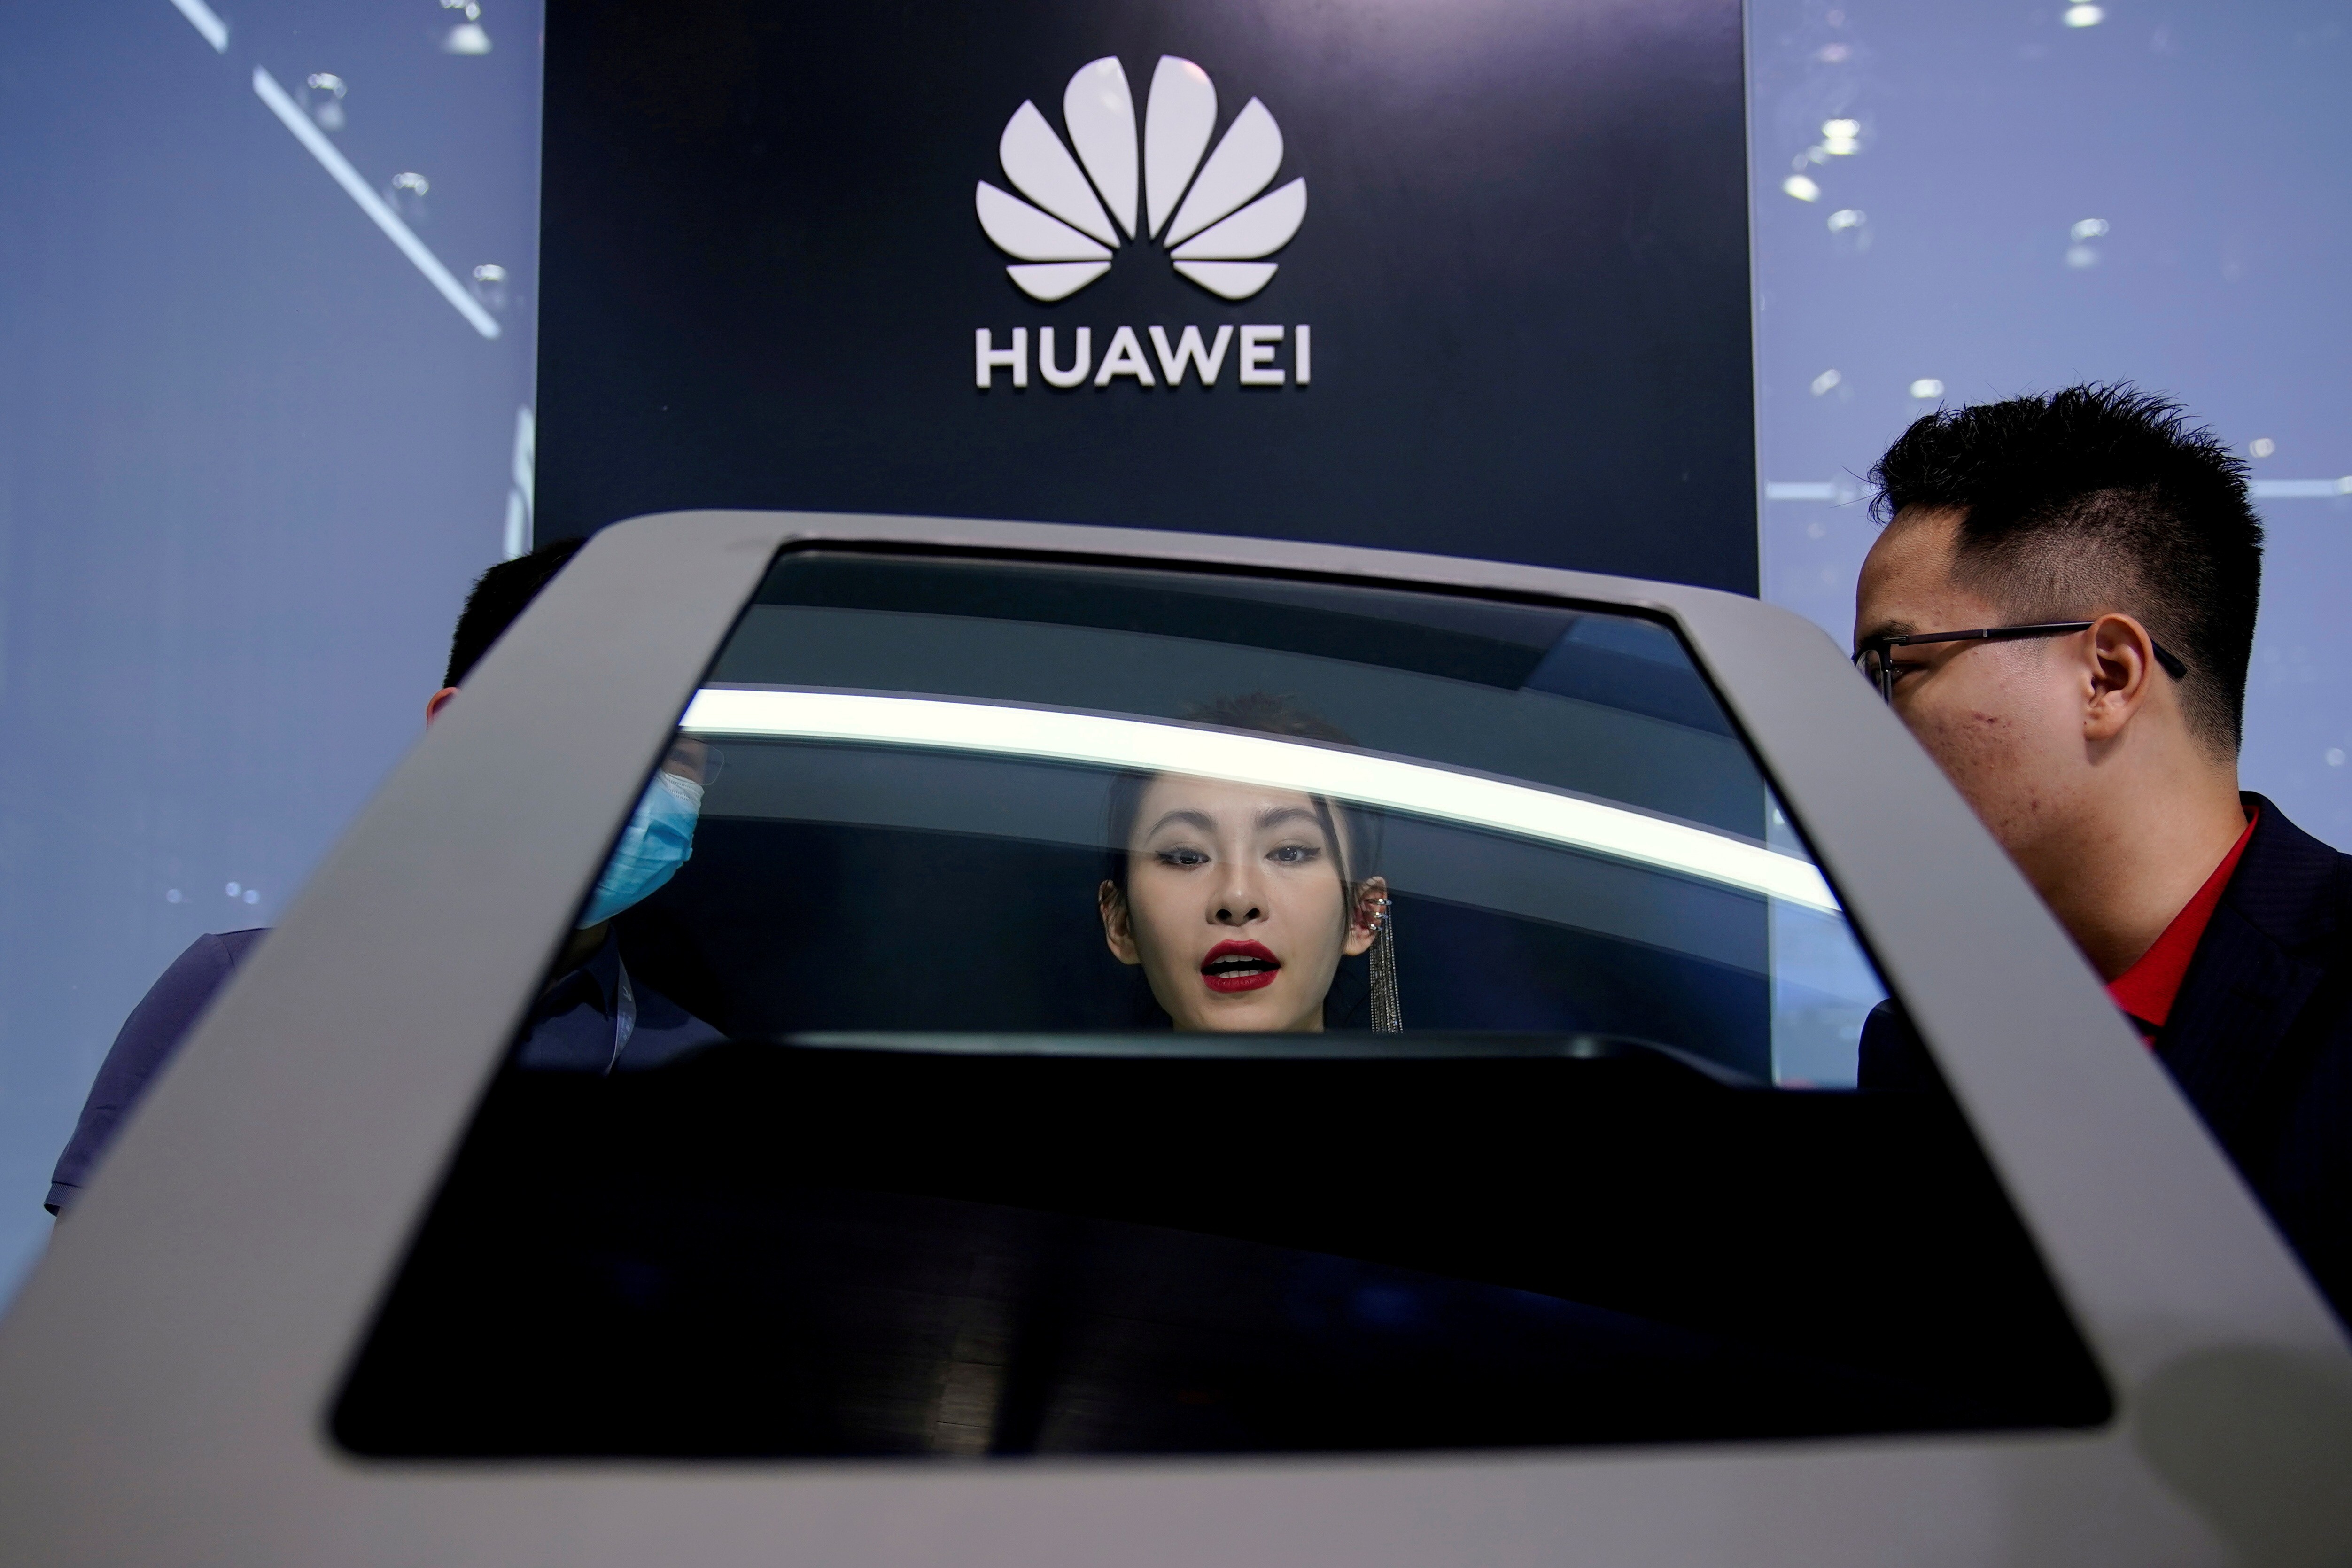 A Huawei display at the Auto Shanghai show in China on April 19, 2021. An outcry has followed reports that Huawei has won approval to purchase American-made automotive chips. Photo: Reuters